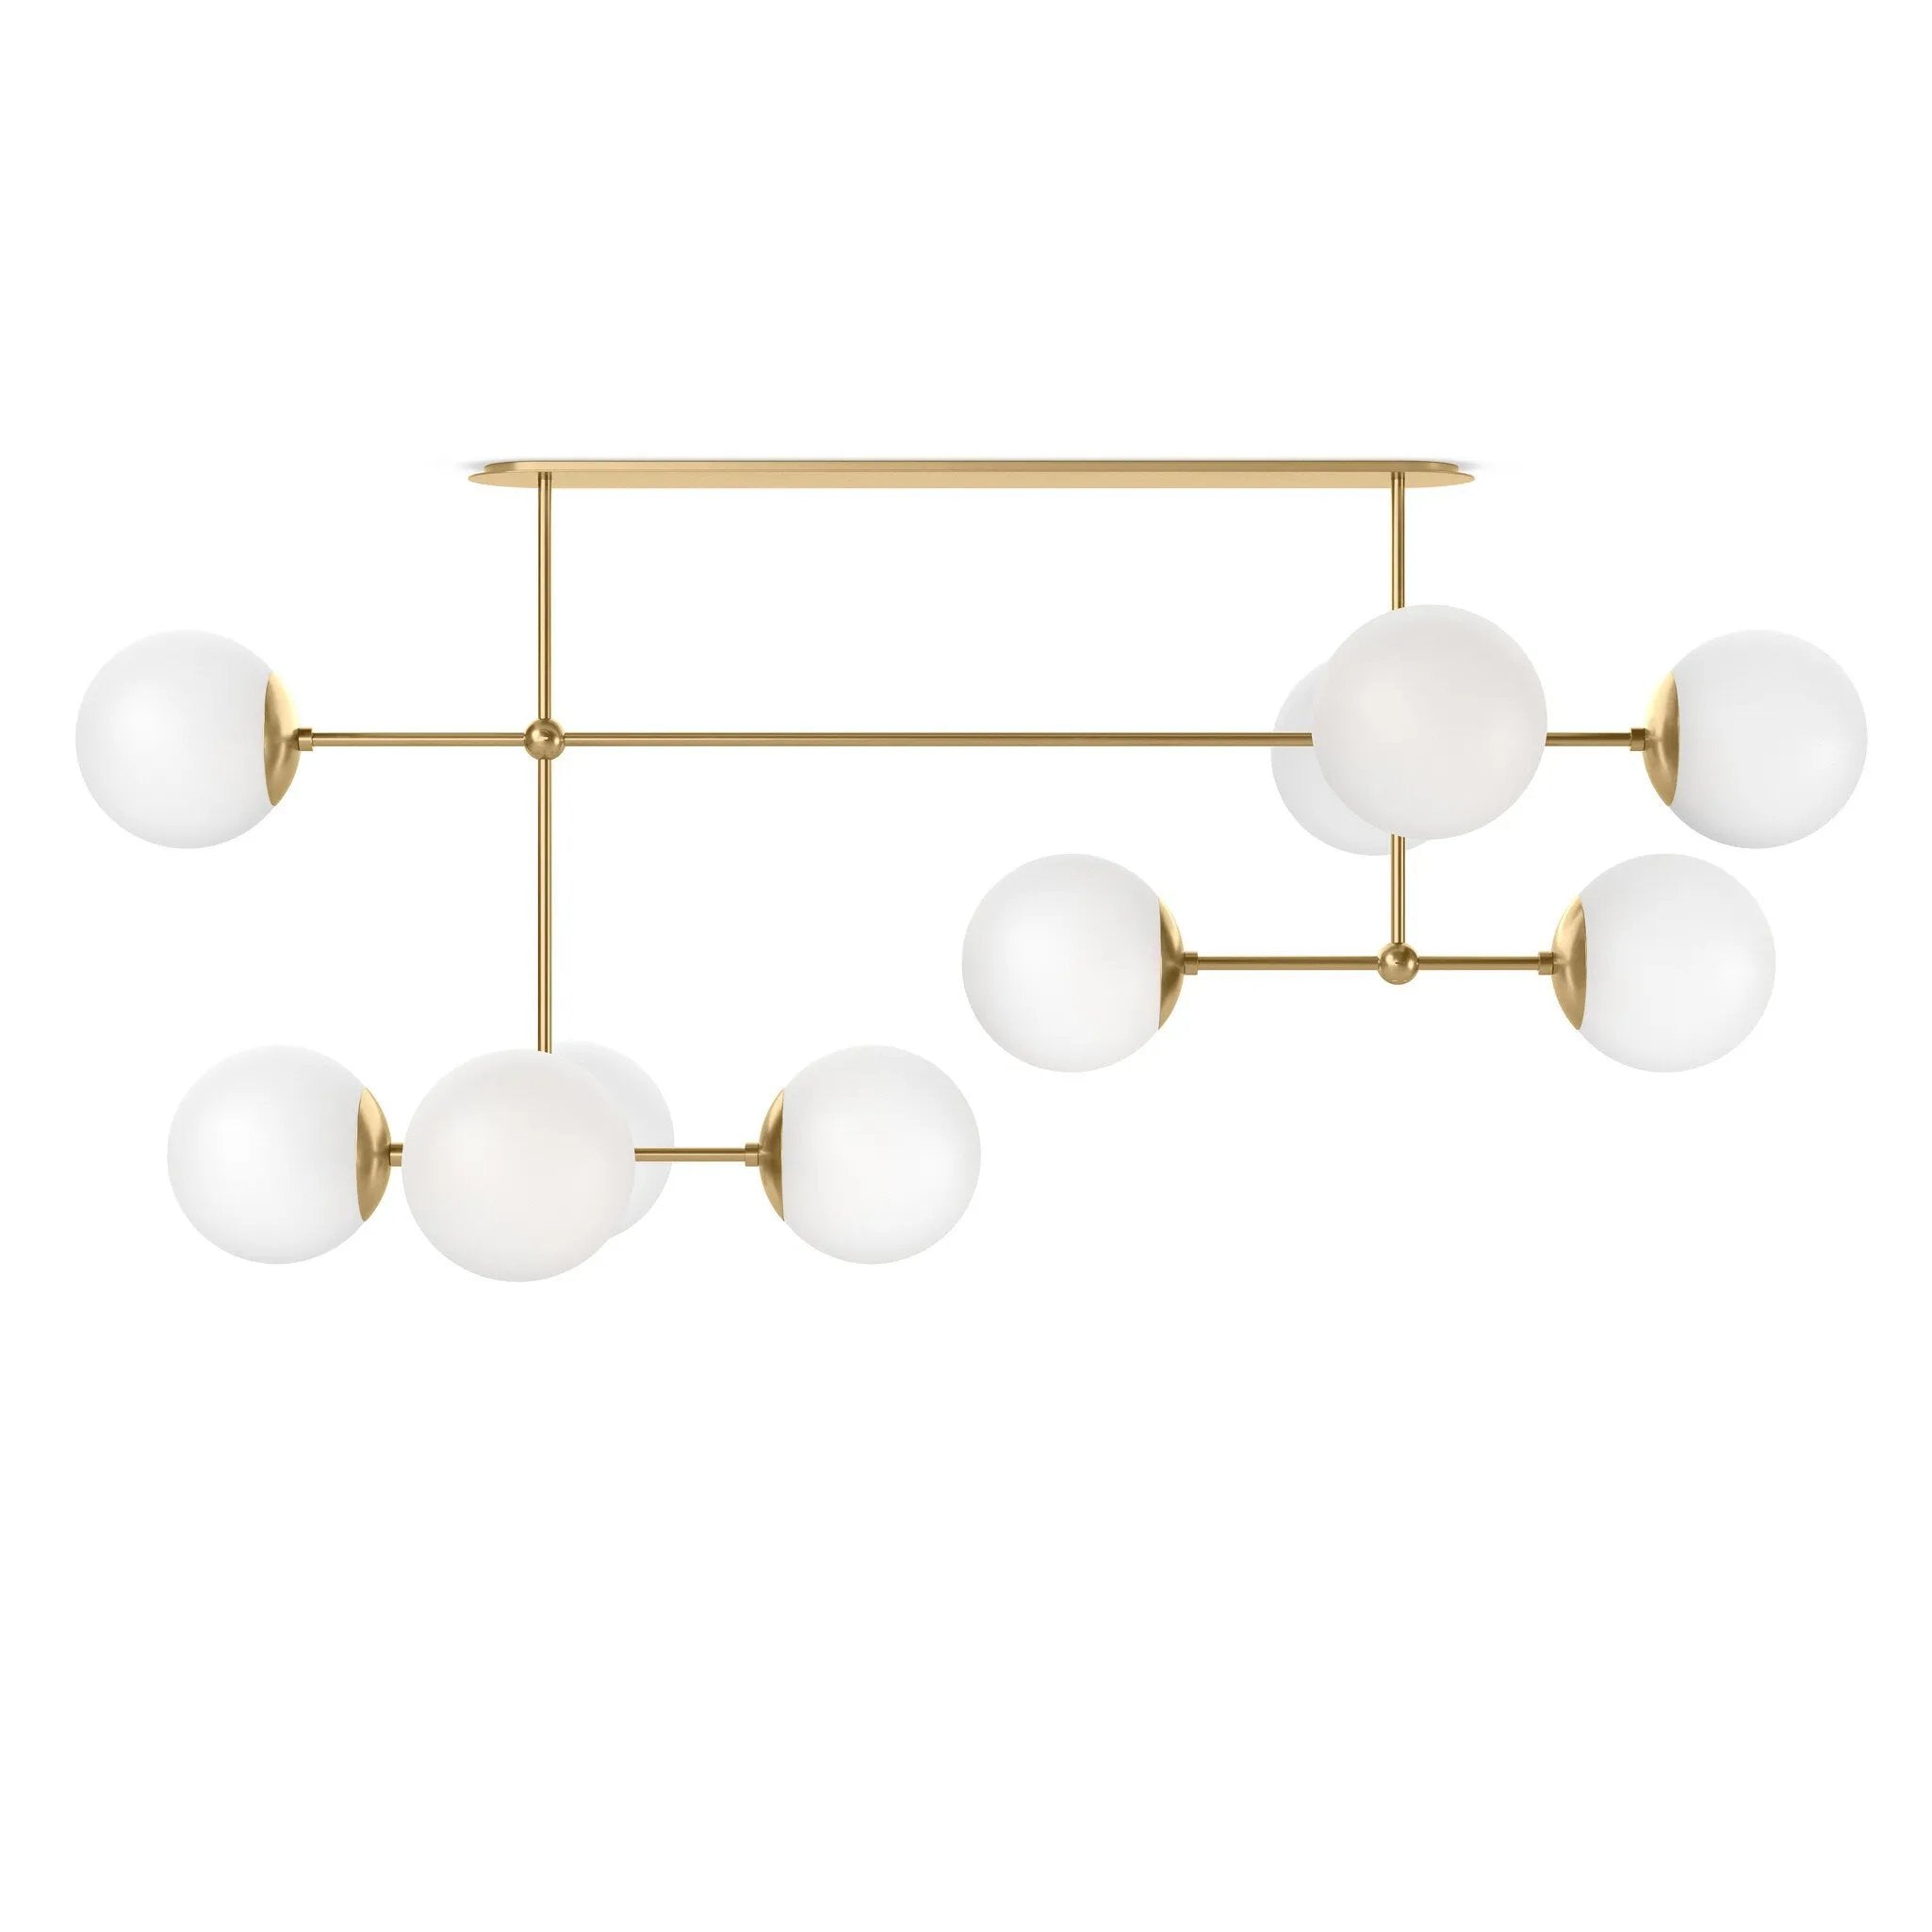 Matte glass spheres seem to extend and reach across smooth brass rods. Each globe is individually blown, shaped and sculpted by hand through a one-hour process. Matte globes are specially manufactured to evenly diffuse light. Brass and glass are 98% recyclable. Designed and sustainably made in Poland by Schwung.Overall Dimensions64.25"w x 30. Amethyst Home provides interior design, new home construction design consulting, vintage area rugs, and lighting in the Kansas City metro area.